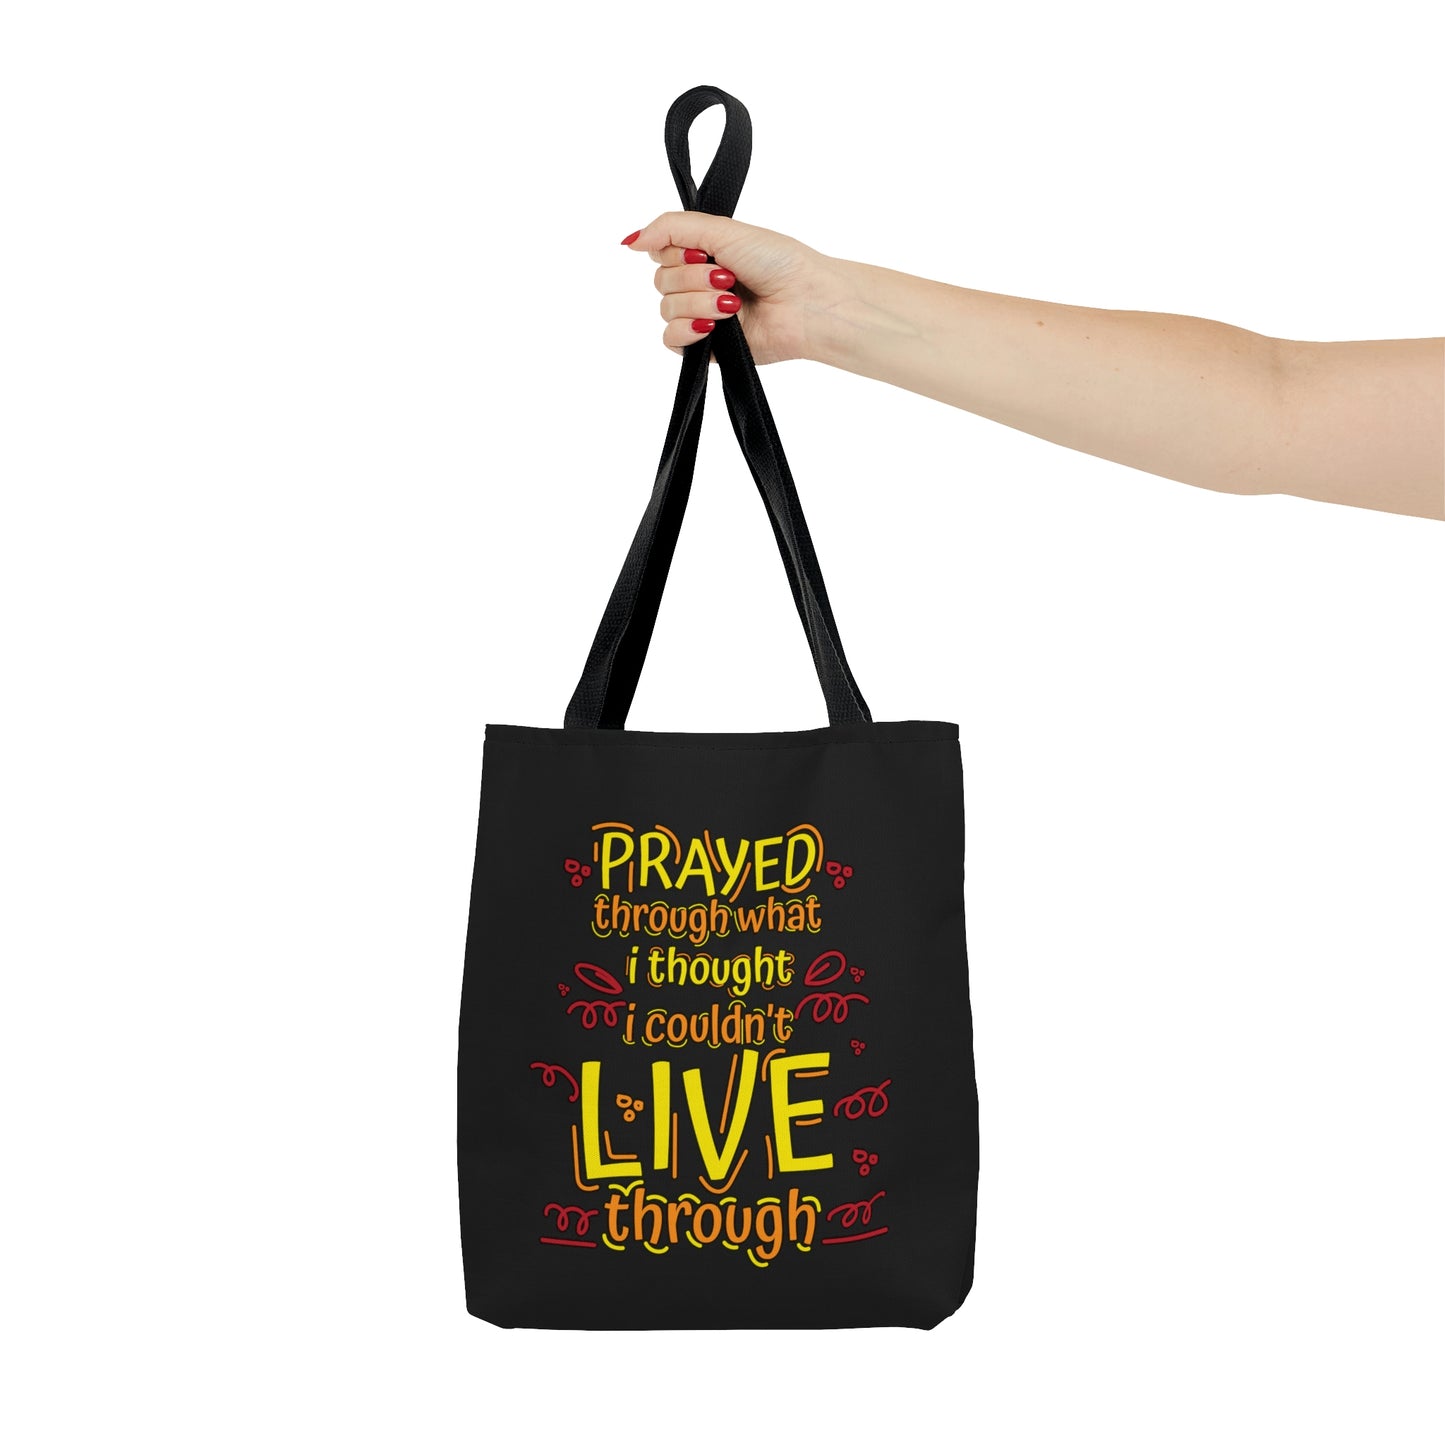 Prayed Through What I Thought I Couldn't Live Through Tote Bag